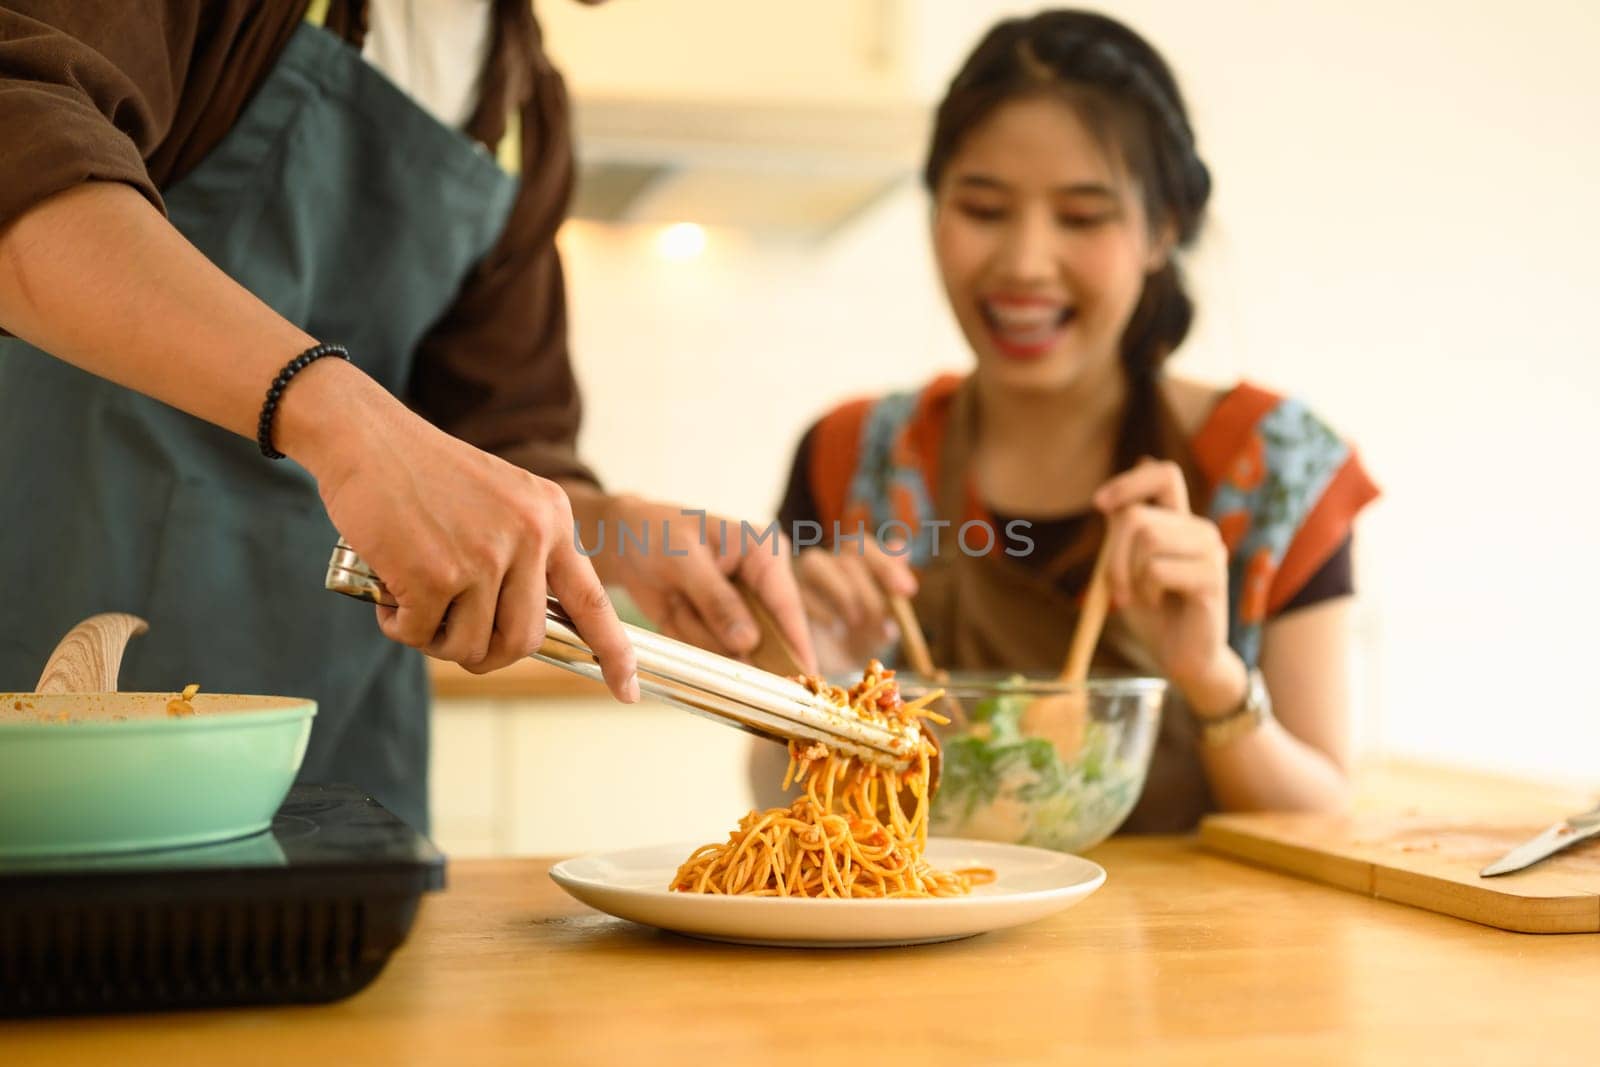 Happy couple enjoying lunch in the dinning room, man serving spaghetti bolognese. Love, relationships and food concept.